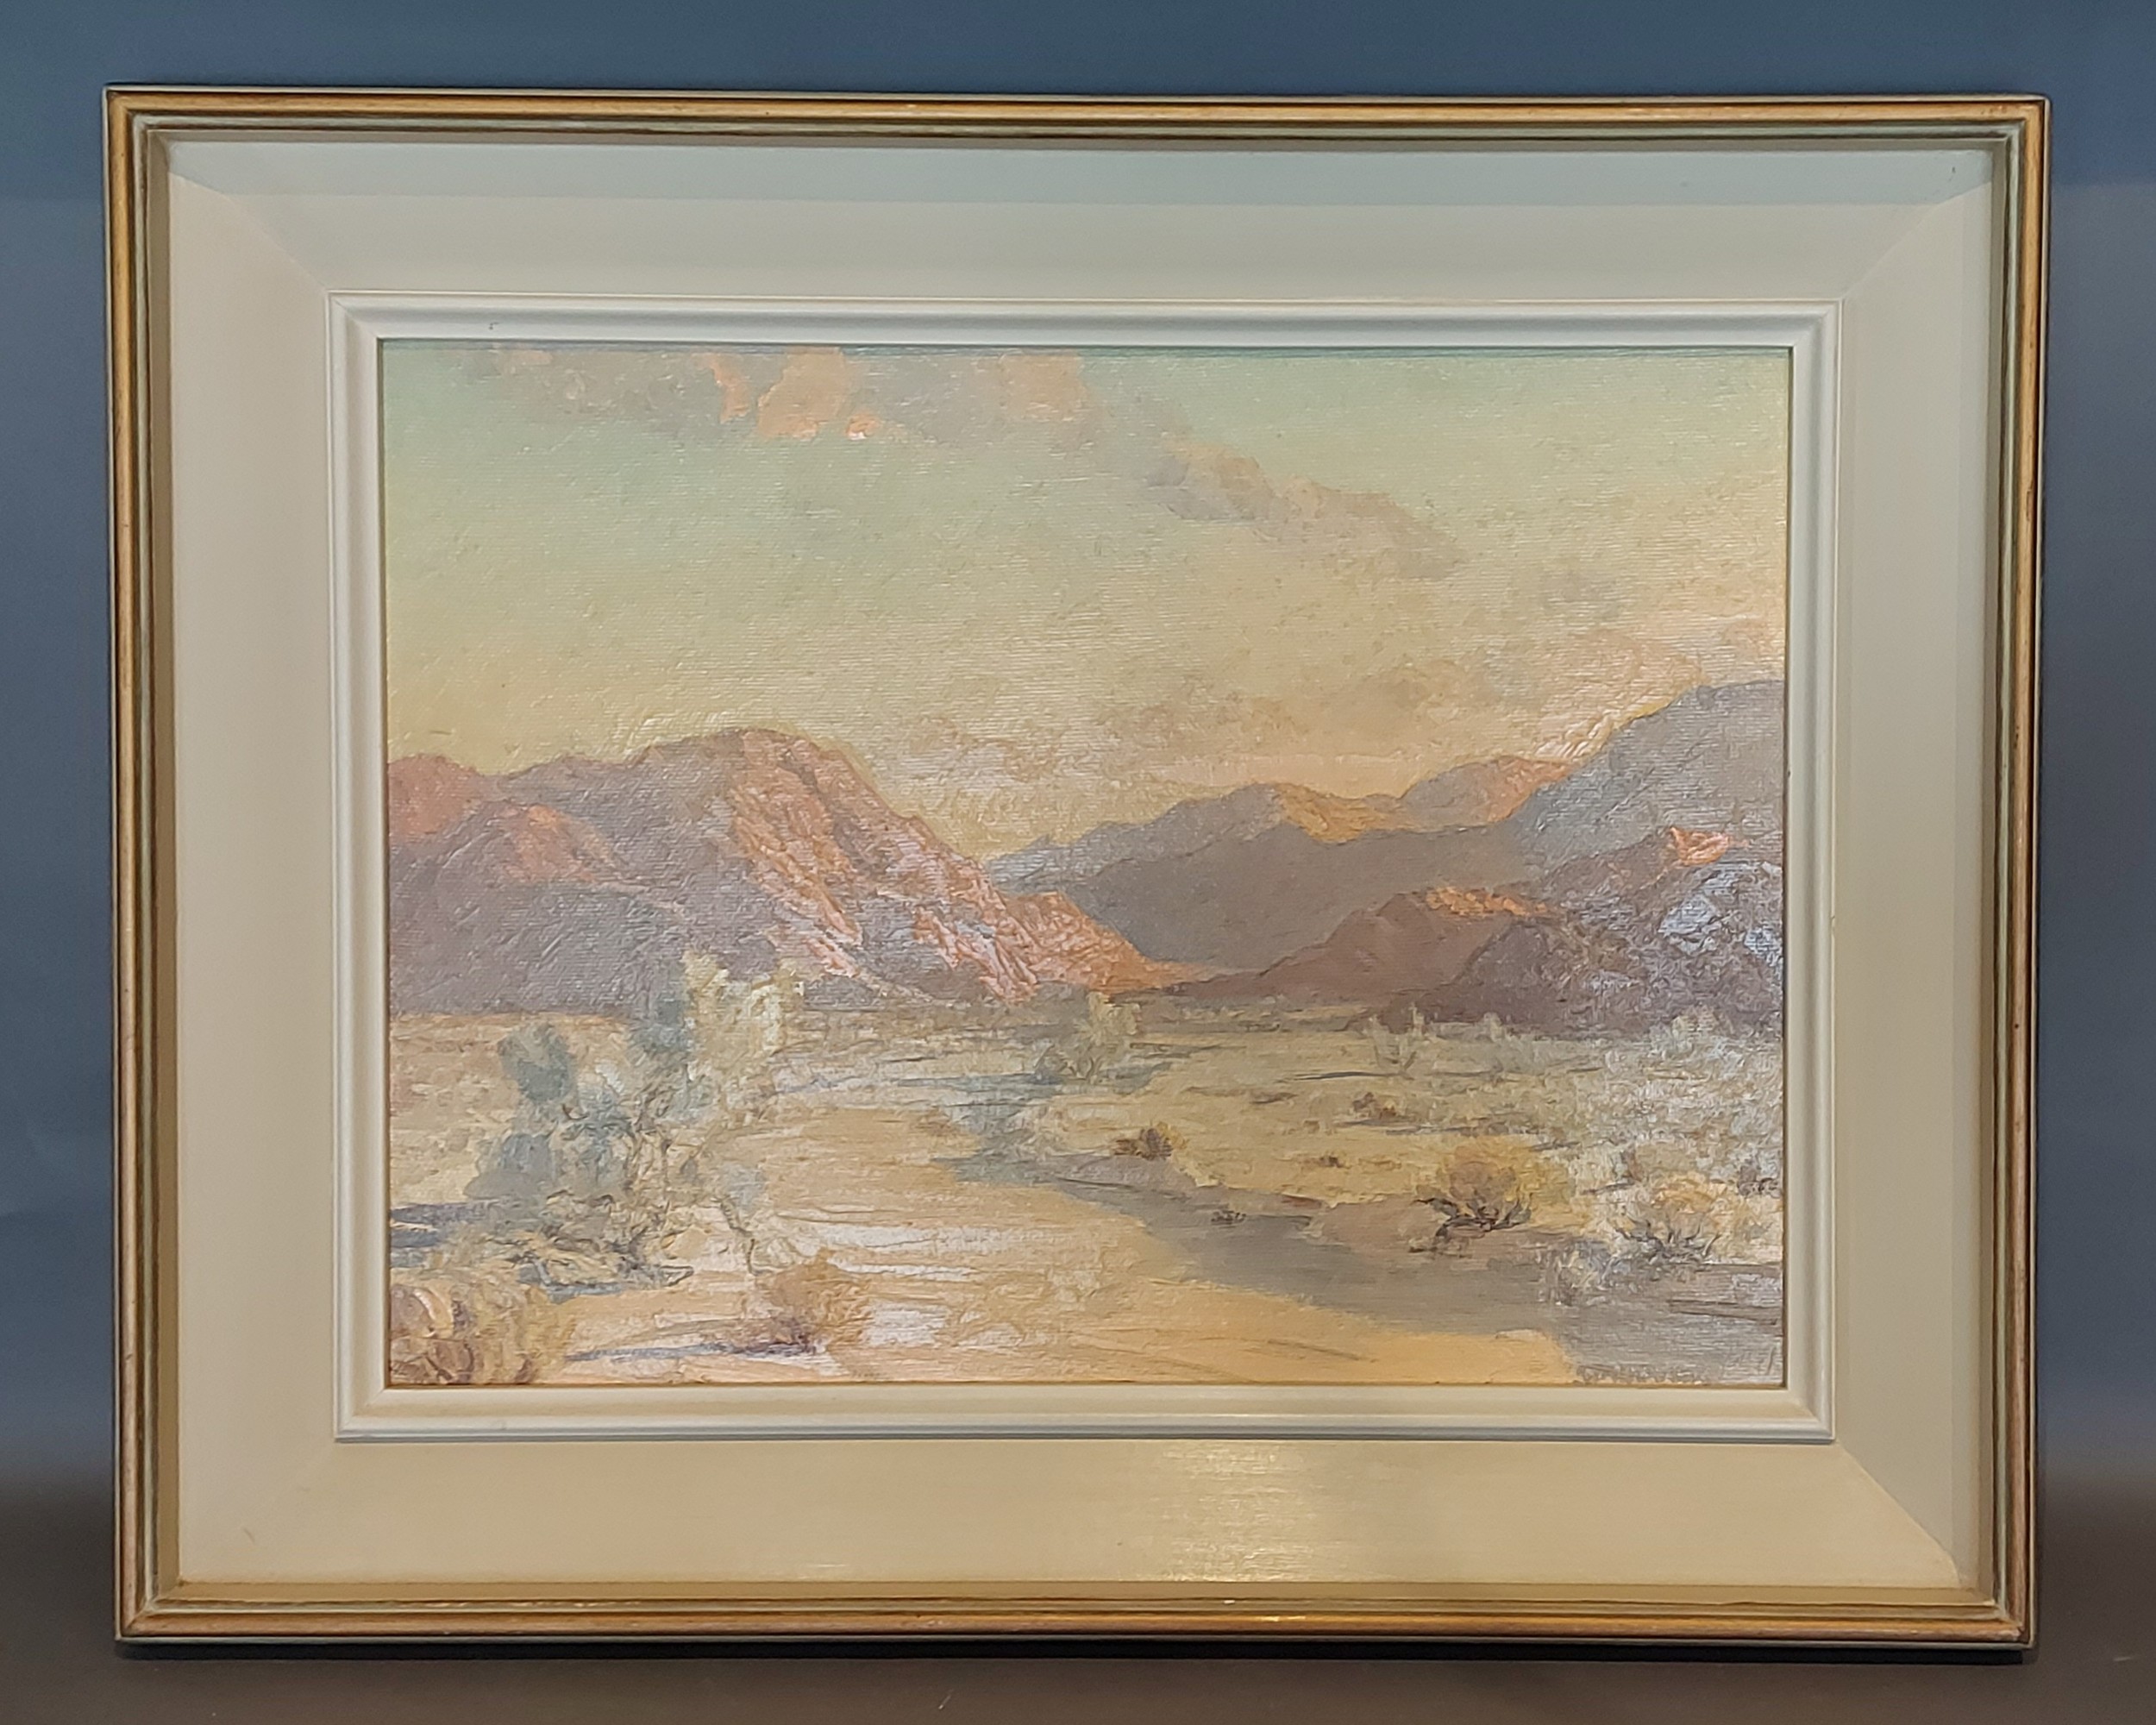 Hamilton G. Stalnaker Jr, Near Palm Springs, oil on board, signed, 44.5cms x 59.5cms - Image 2 of 2